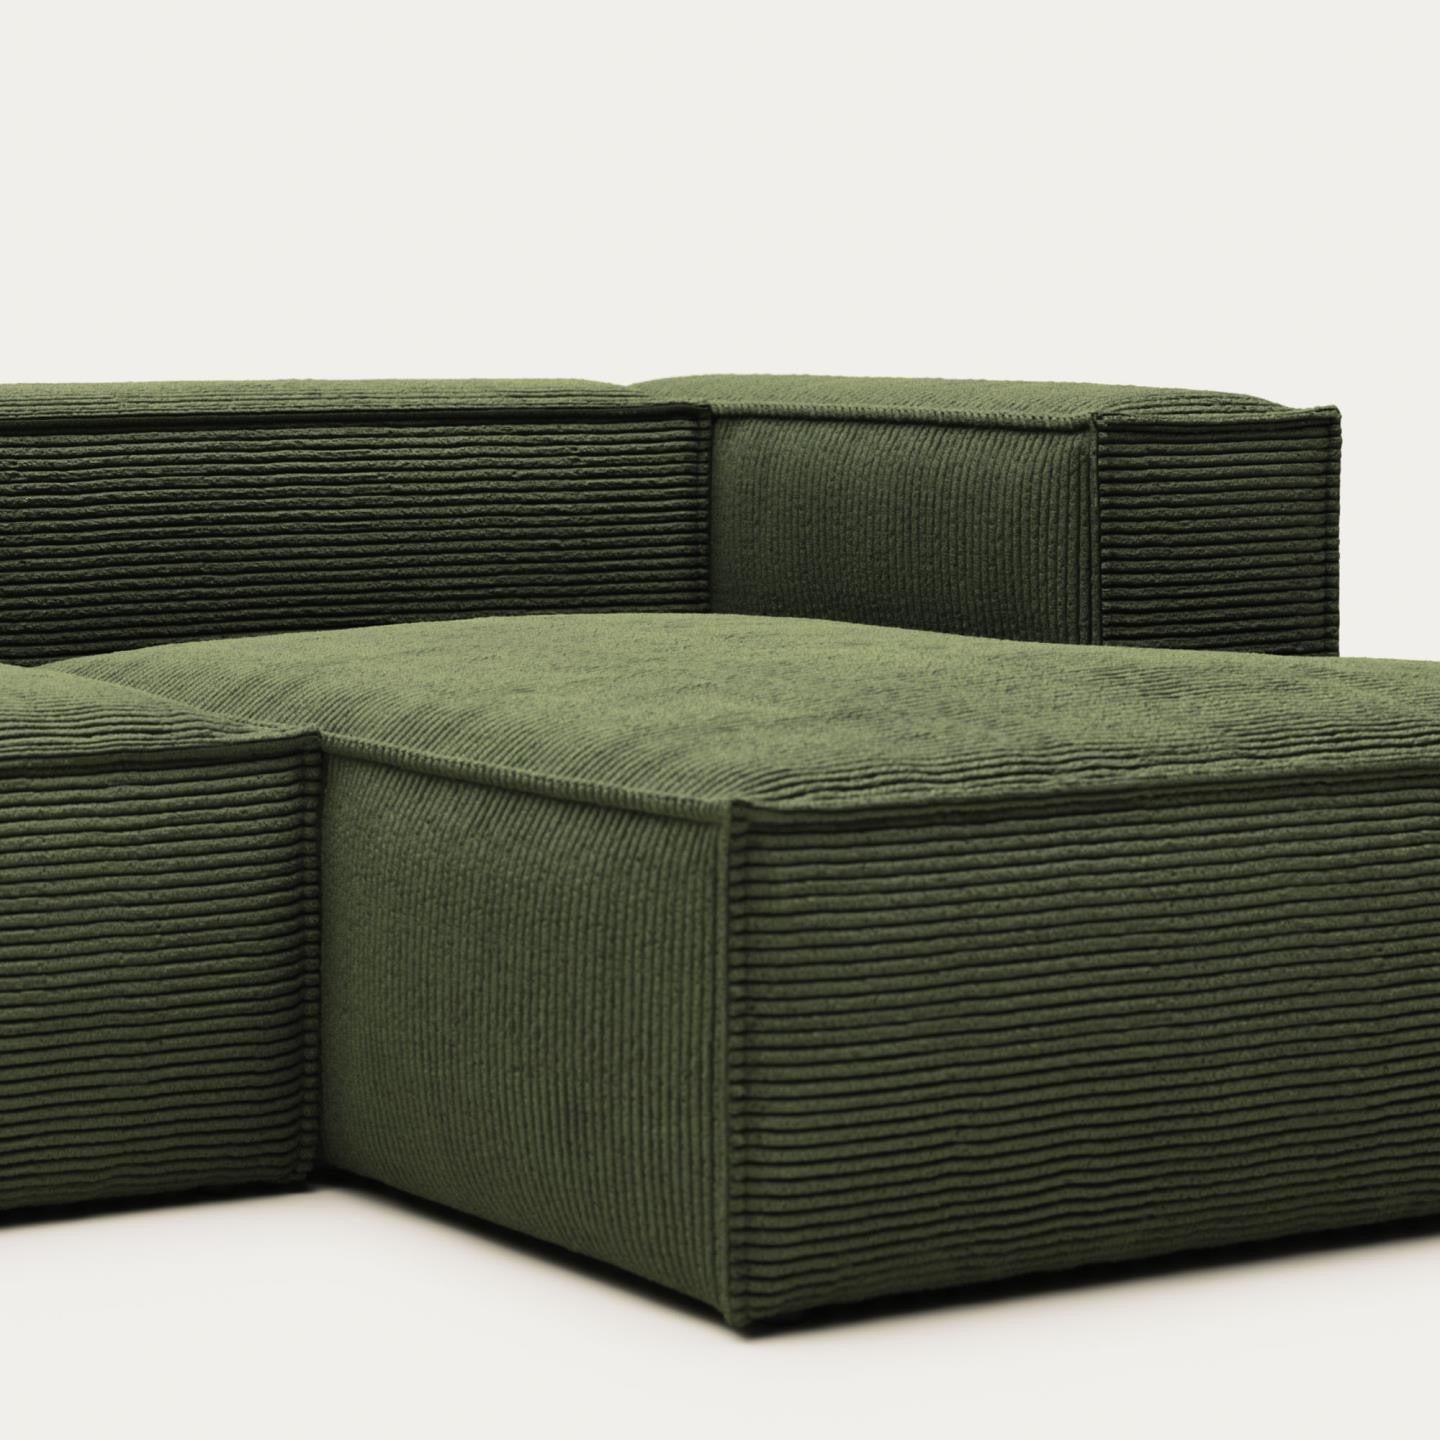 Lund 2 Seater Sofa with Right Side Chaise - Green Corduroy